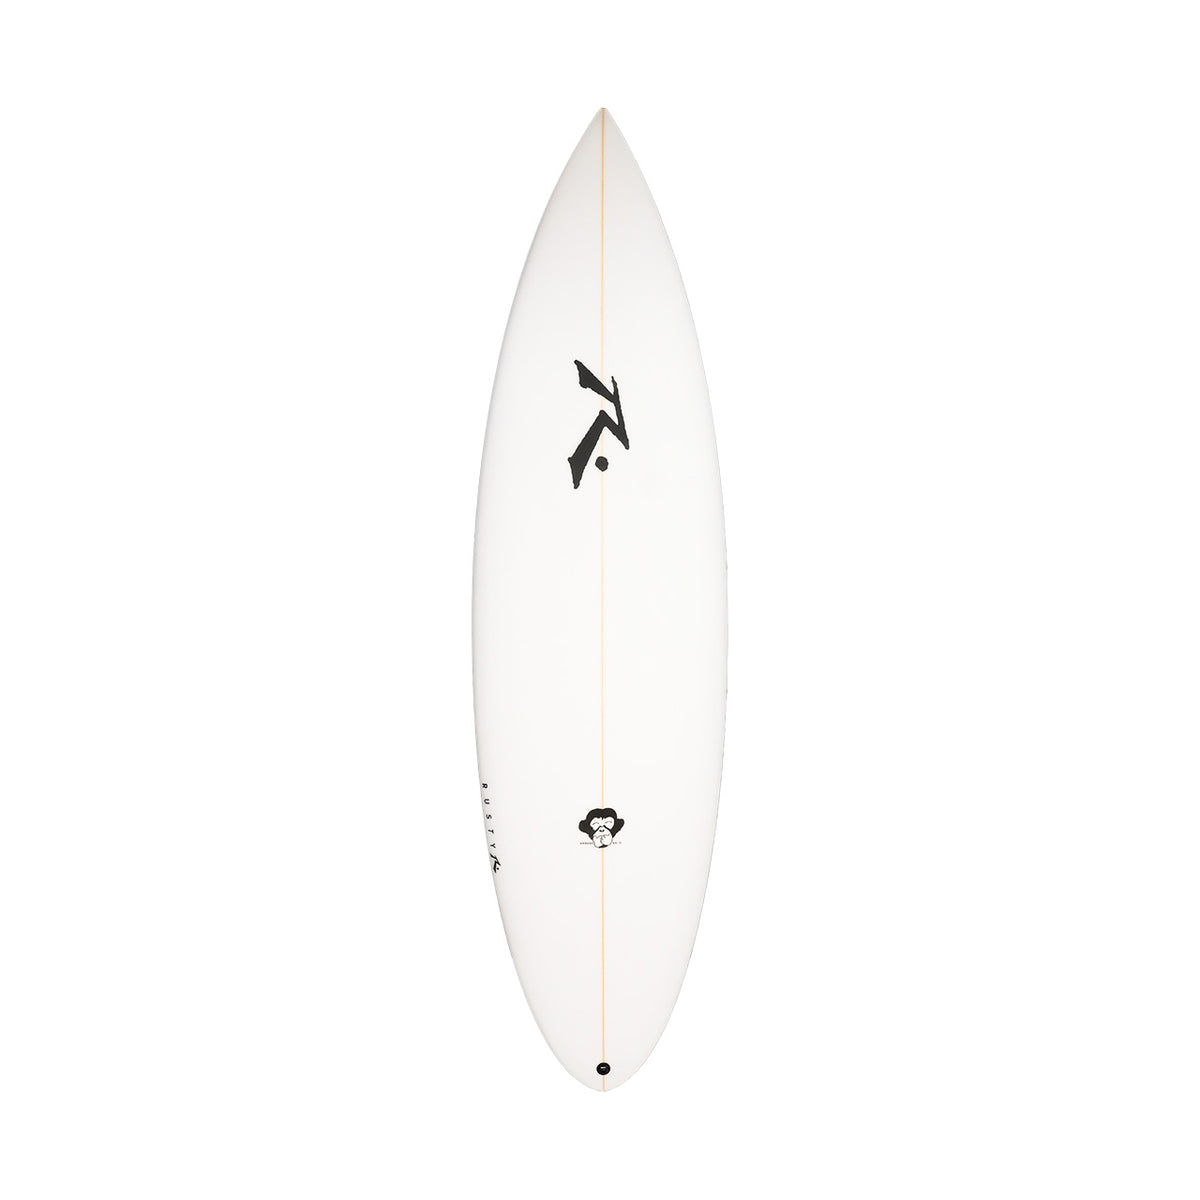 Enough Said High Performance Shortboard - Deck View - Rusty Surfboards